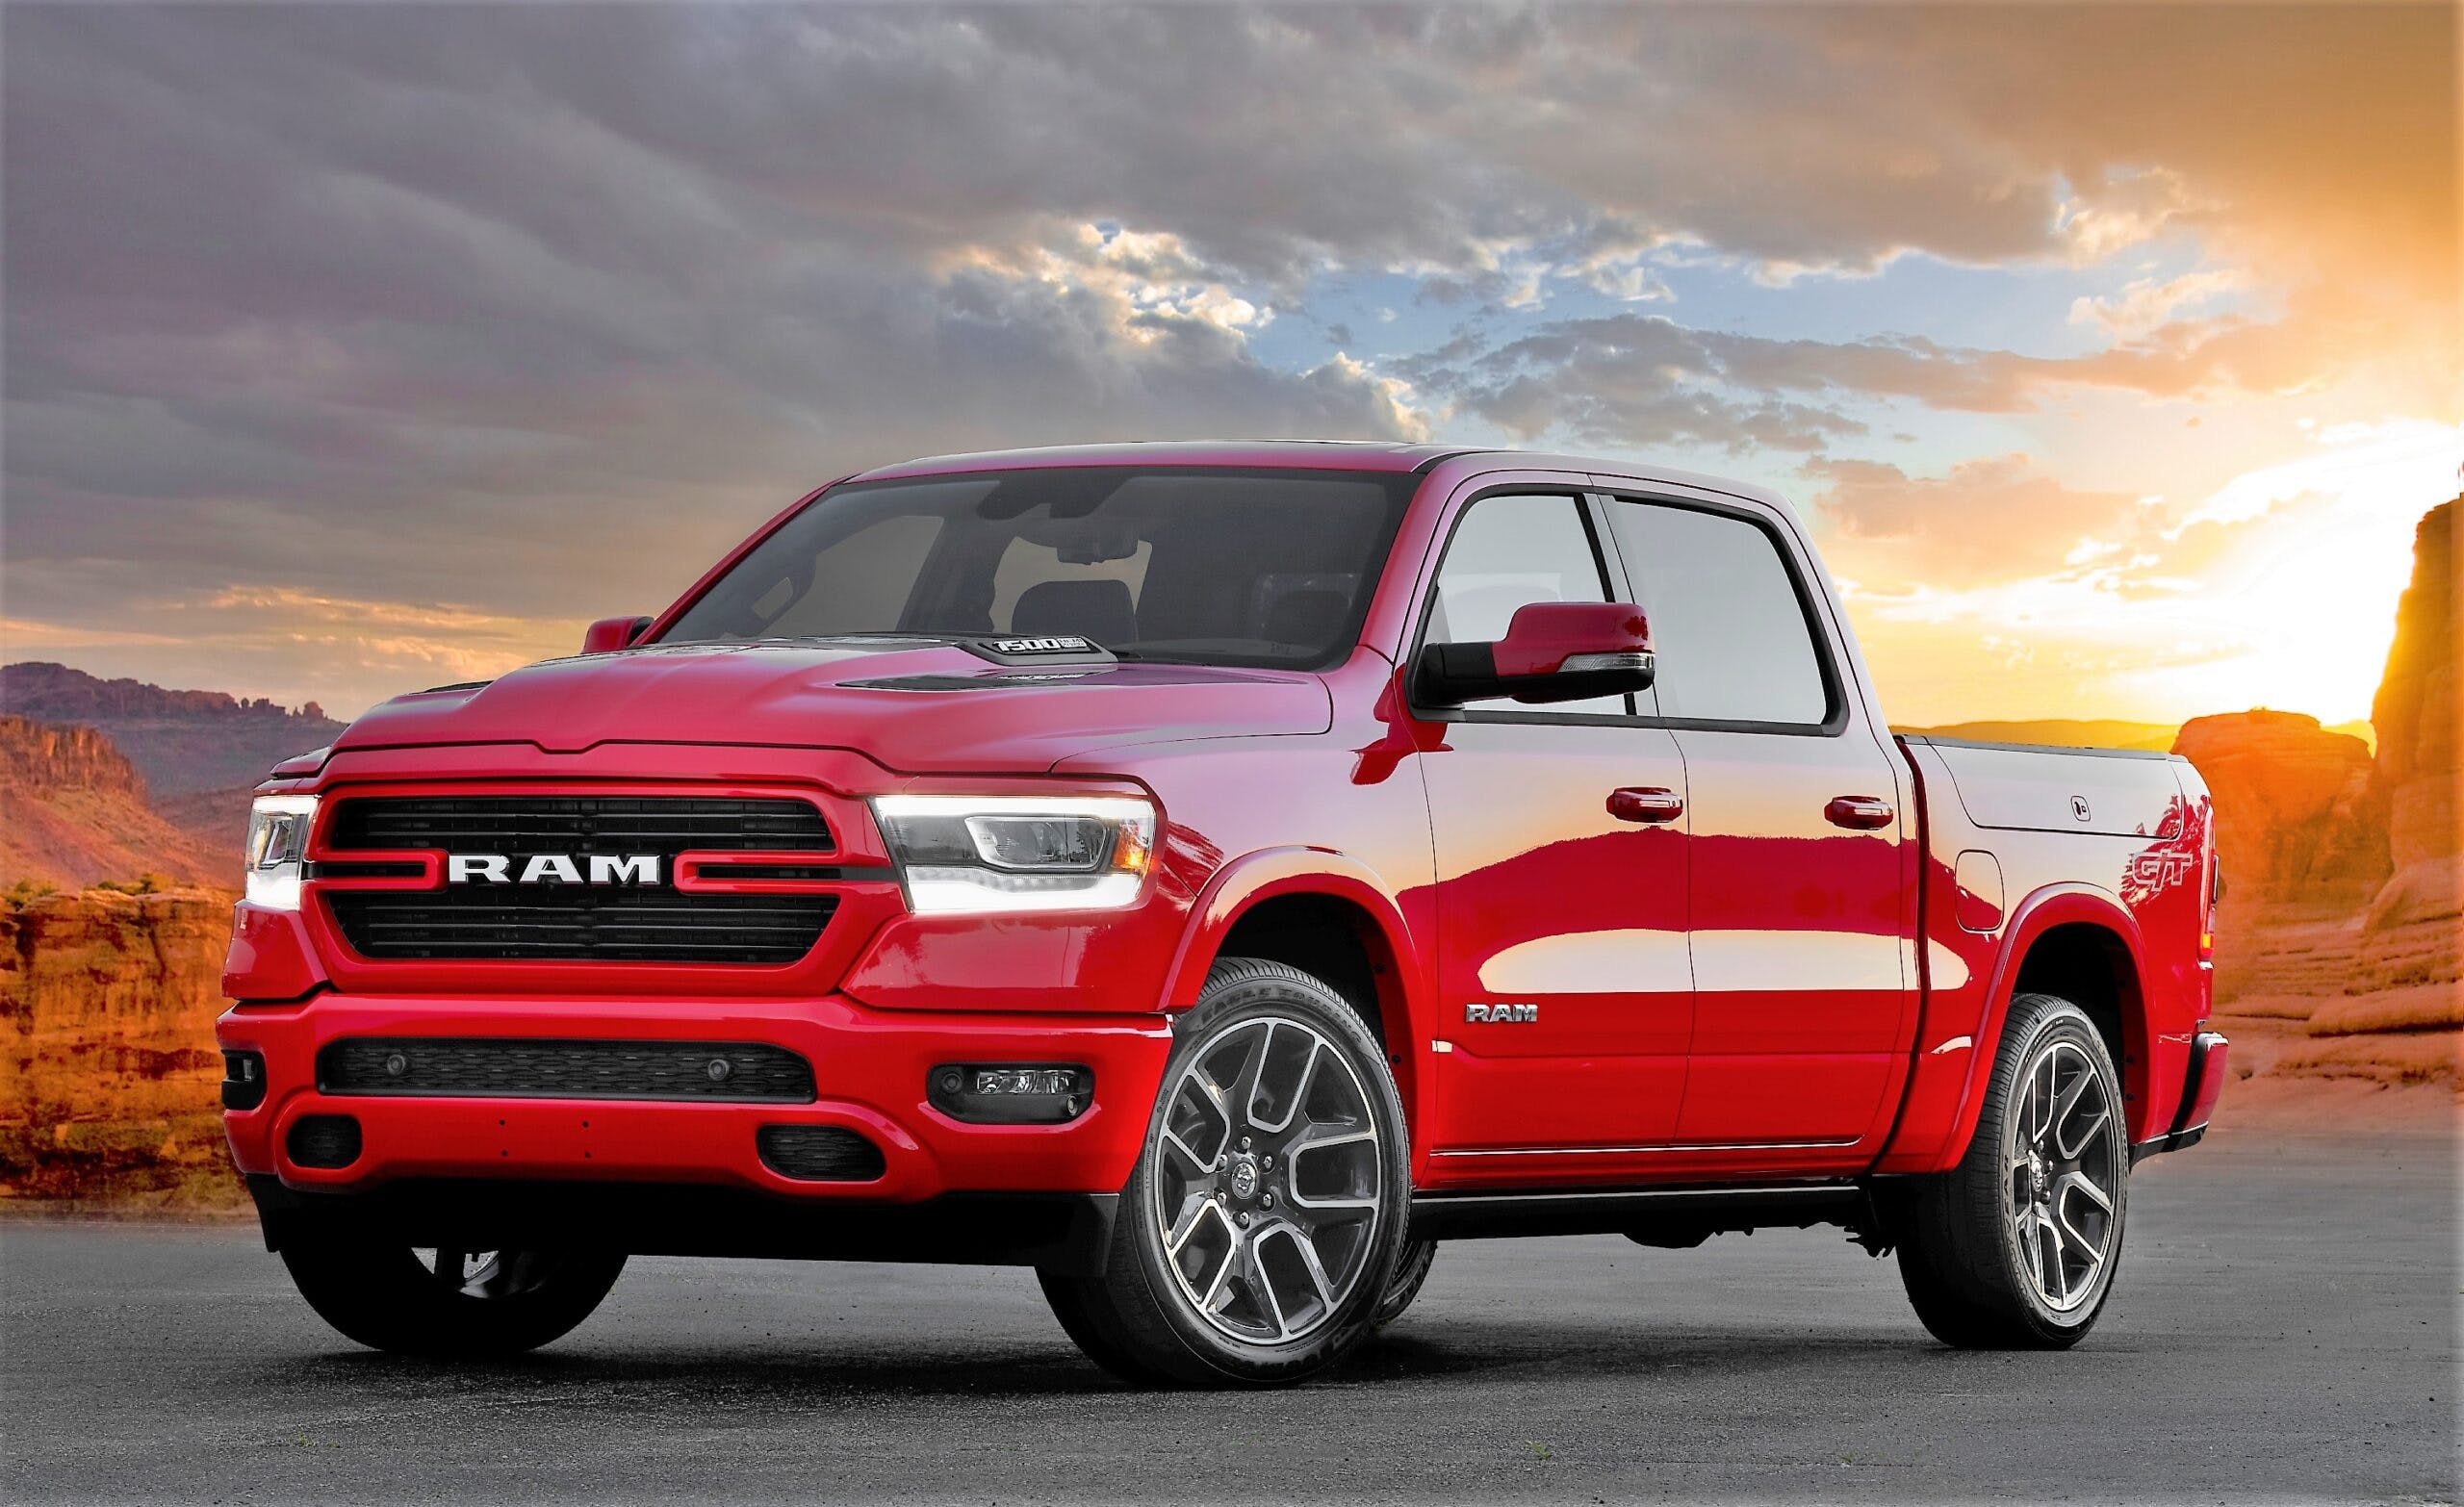 Test Drive: 2022 Ram 1500 G/T Review - CARFAX